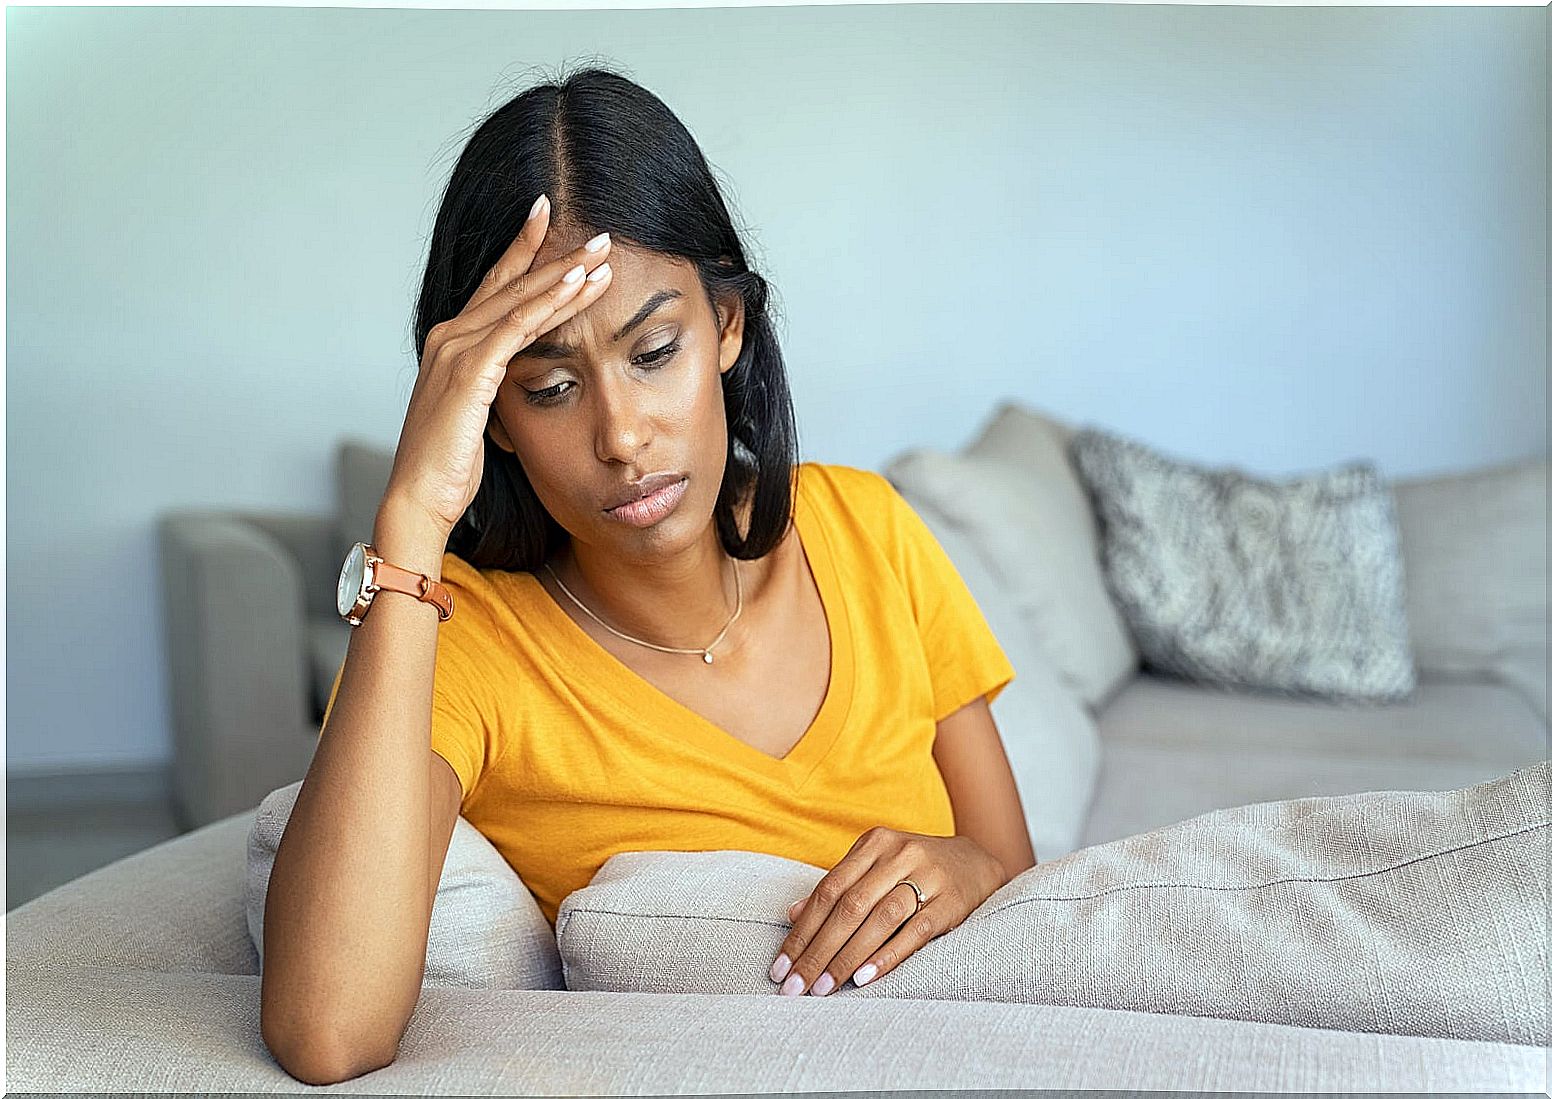 Tension headache is a type of headache that occurs after childbirth